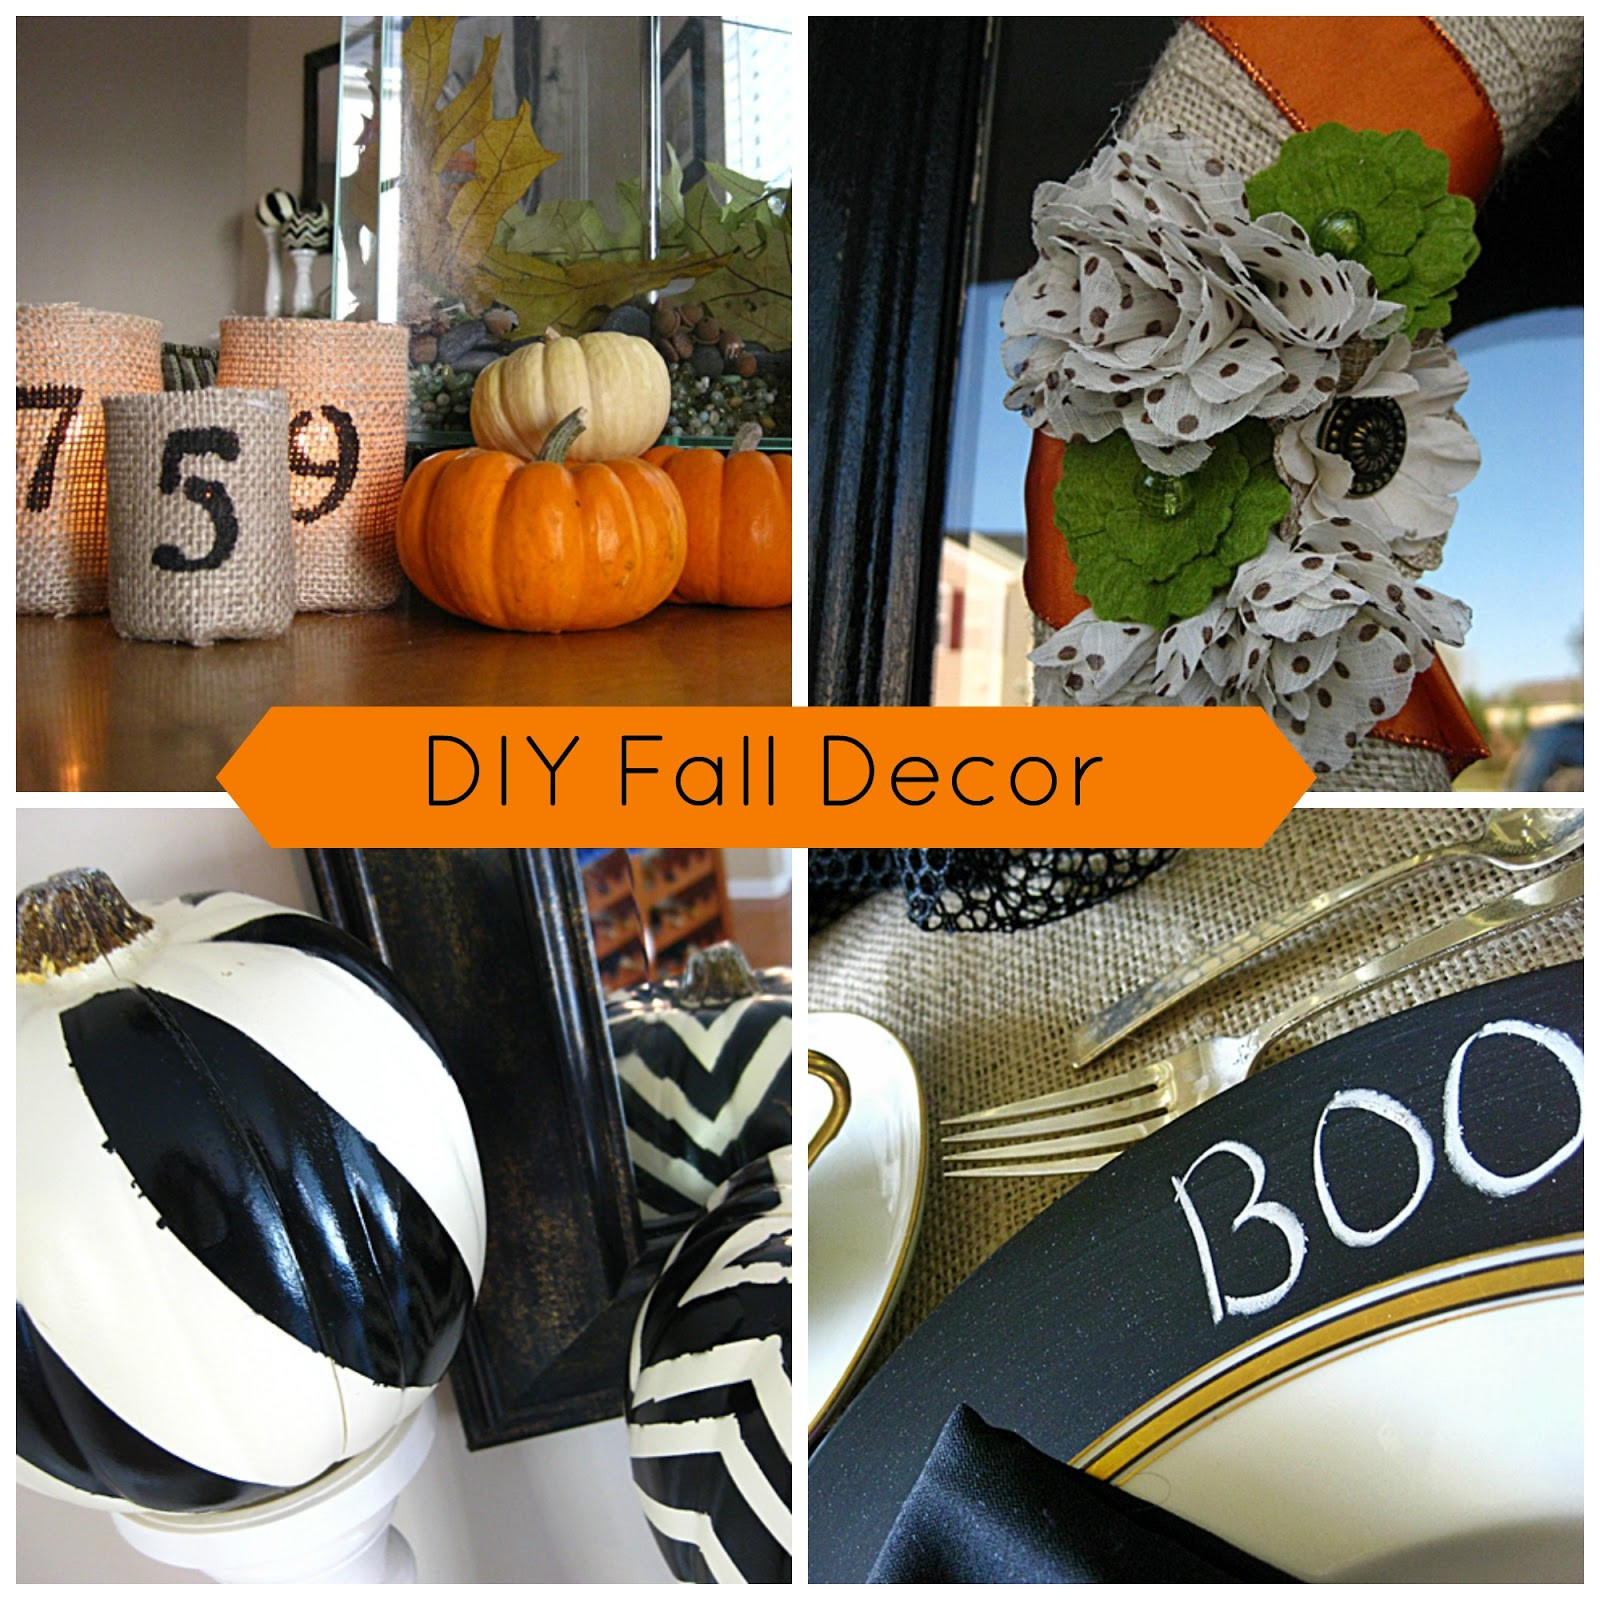 Inexpensive Fall Decorating Ideas
 Eat Sleep Decorate DIY Cheap & Easy Fall Decorating